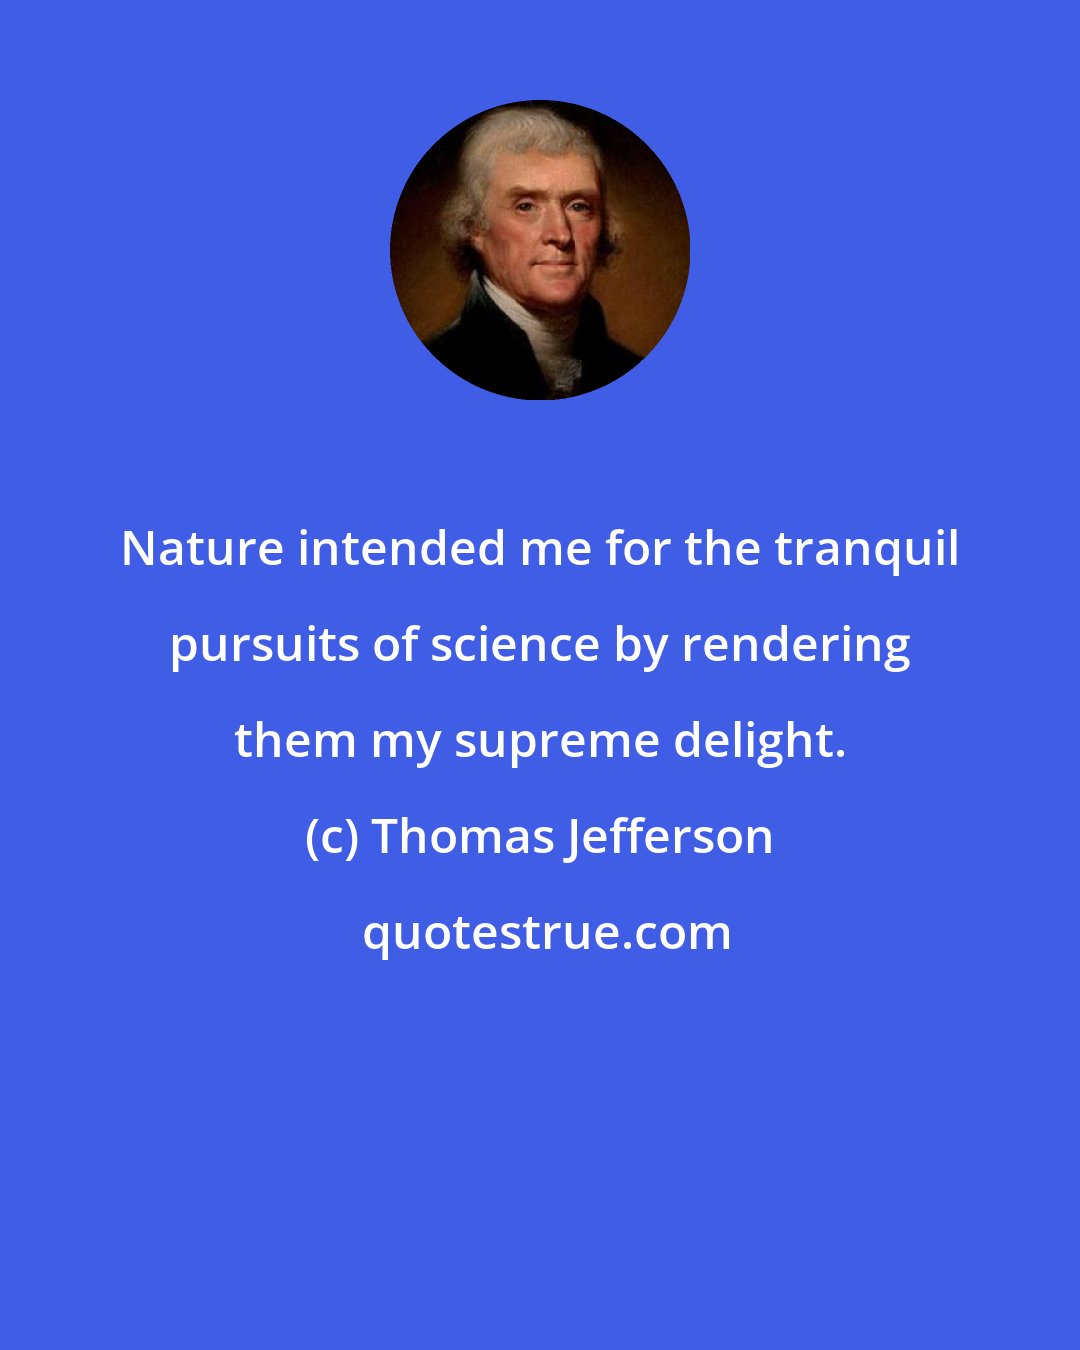 Thomas Jefferson: Nature intended me for the tranquil pursuits of science by rendering them my supreme delight.